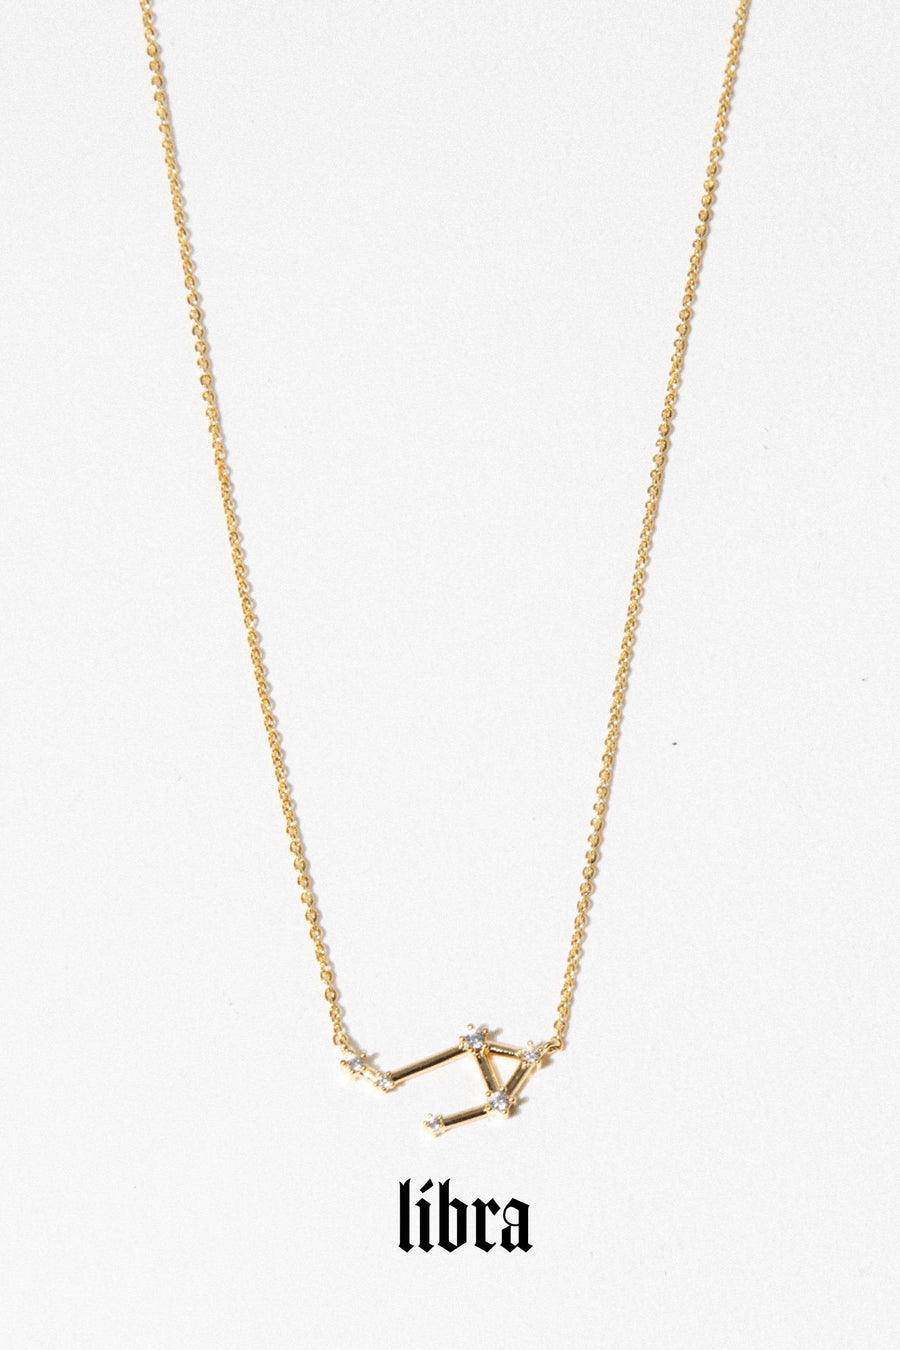 charis Jewelry Libra / 16 Inches / Gold Constellation Necklace